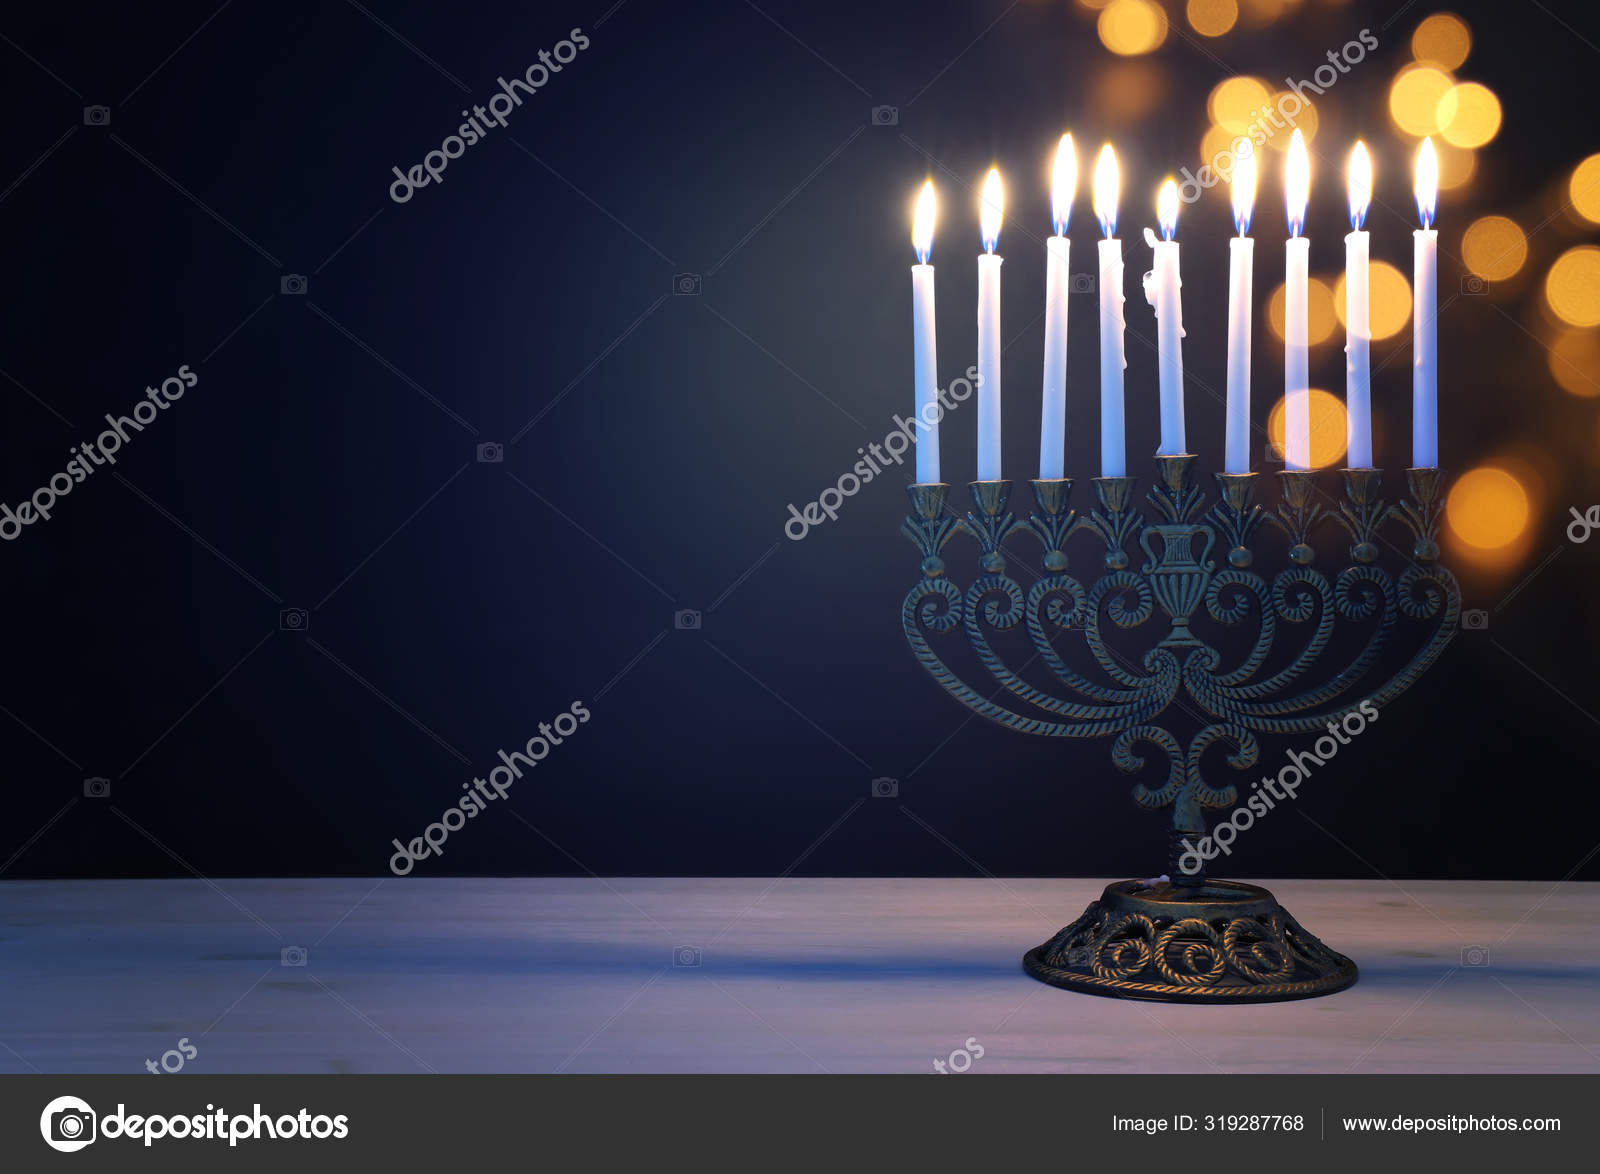 Supervisar Falange Incorrecto Religion image of jewish holiday Hanukkah background with menorah (traditional  candelabra) and candles Stock Photo by ©tomert 319287768